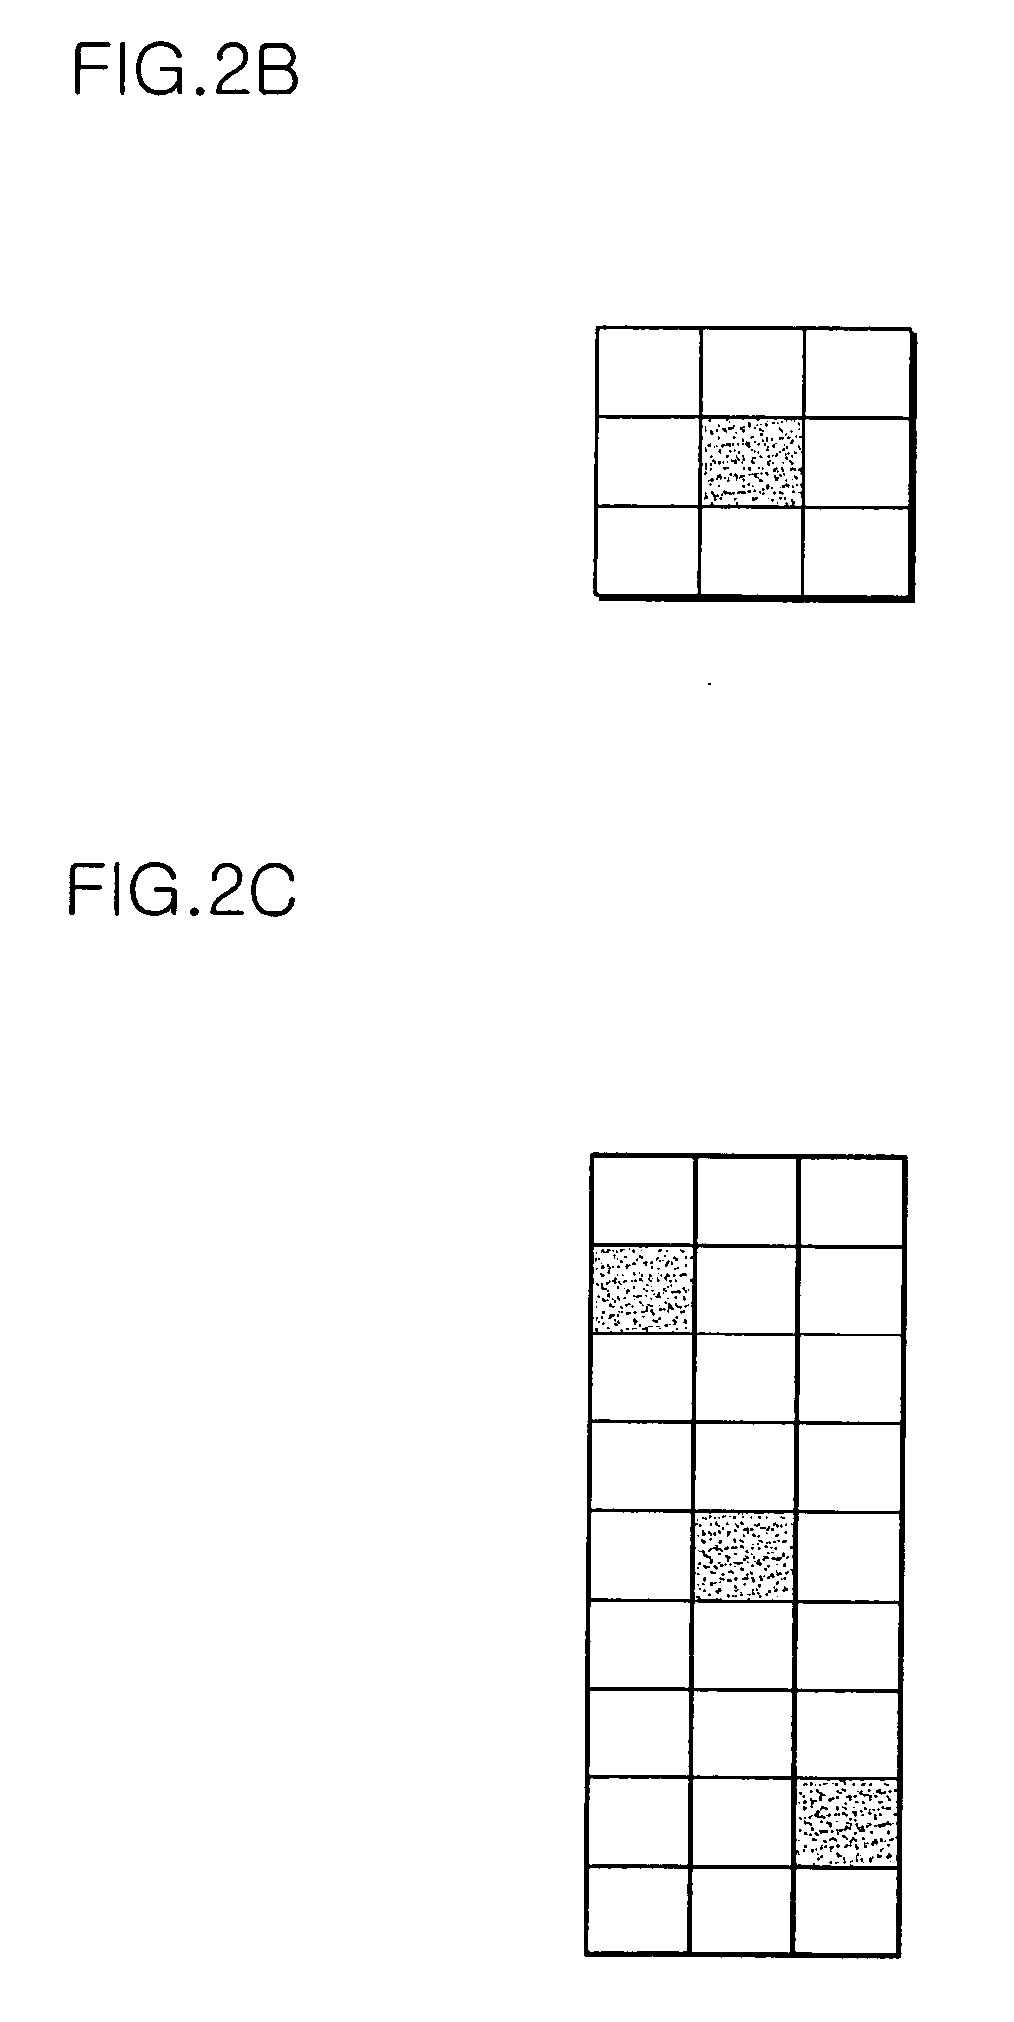 Method and apparatus for measuring uplink data throughput in WiBro repeater